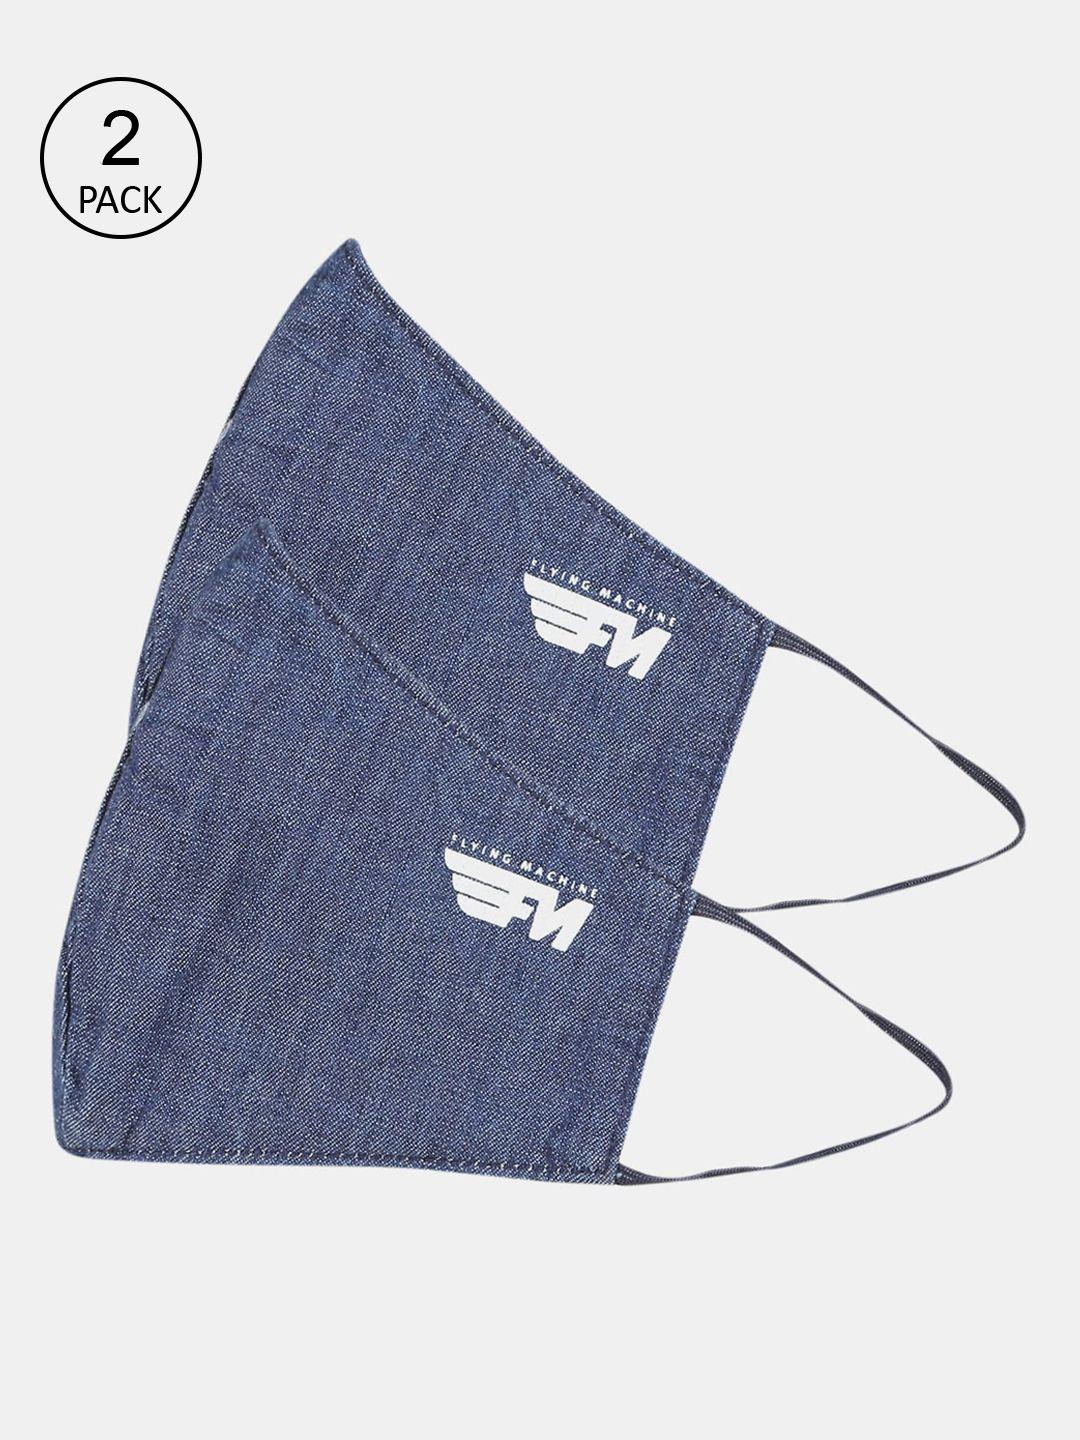 flying-machine-unisex-pack-of-2-blue-&-white-solid-3-ply-reusable-denim-cloth-masks